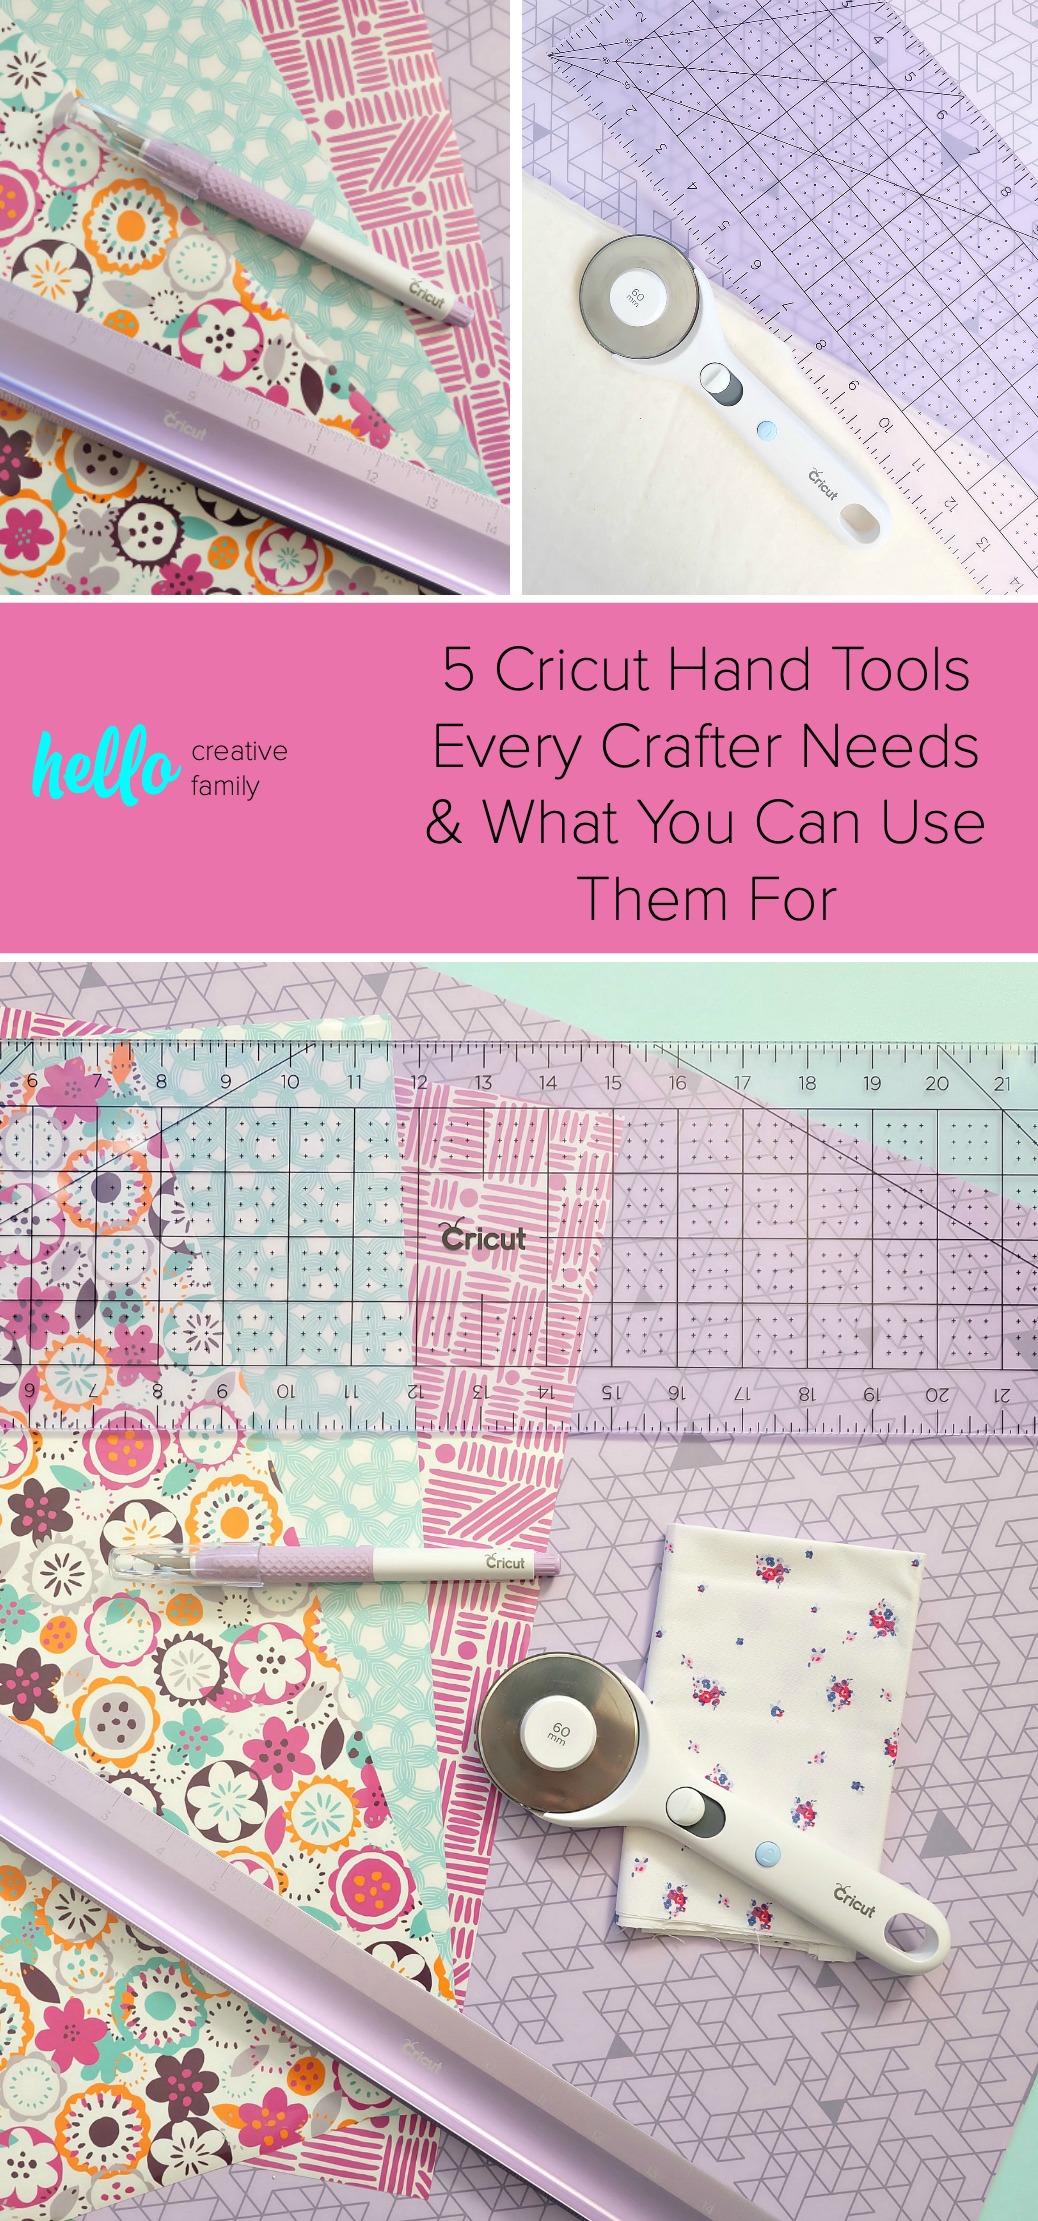 Do you like to craft? We're sharing with you 5 Cricut hand tools that every crafter needs and what you can use them for! Whether you own a Cricut cutting machine, or your still saving up, these tools are essentials for every craft room! We're sharing why we love them and why you need them in your craft life too whether you love working with htv, paper, leather, cardboard or other craft supplies! #Cricut #Sponsored #CraftRoom #CraftTools #Craft #CricutMade 